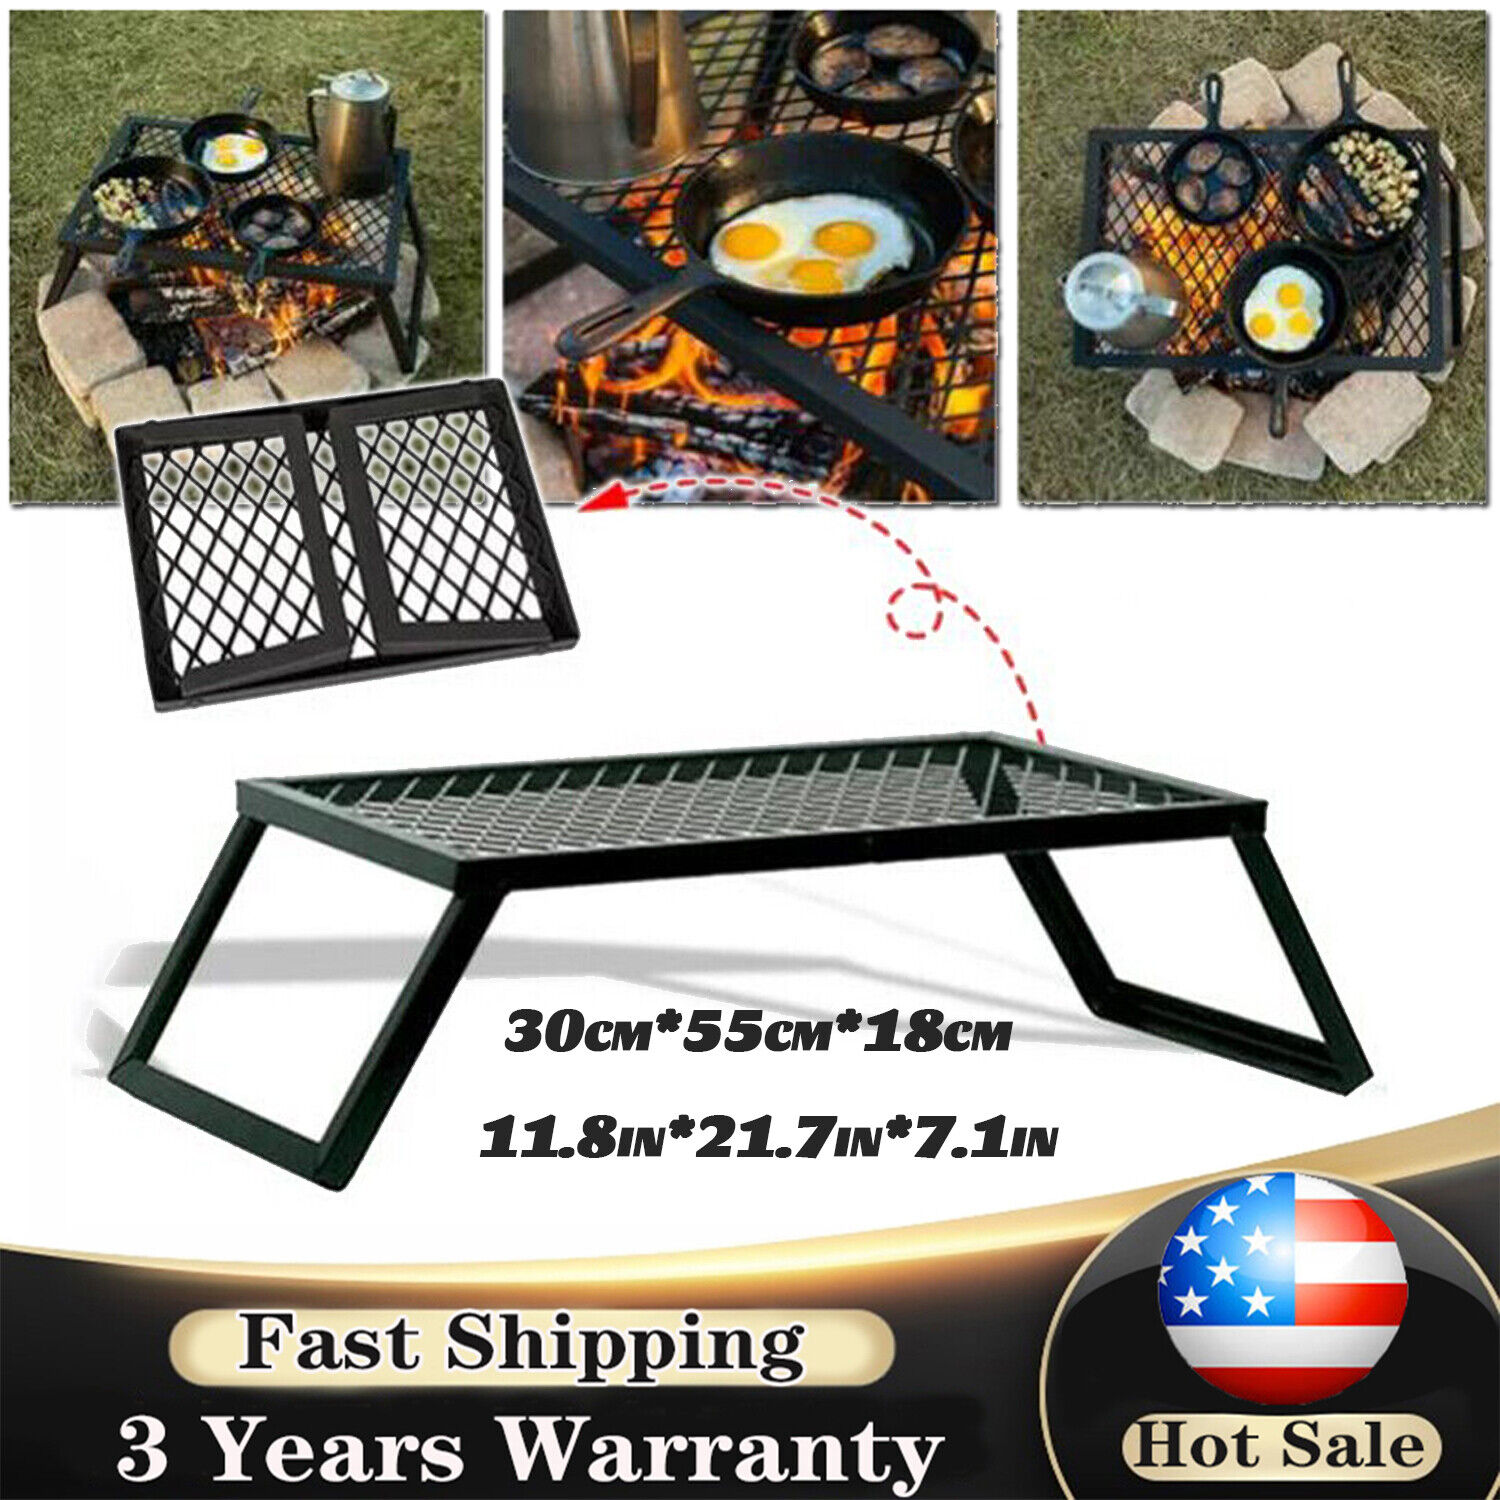 Modern Portable Bbq Grill Fire Pit Camping Charcoal Patio Party Garden Outdoor